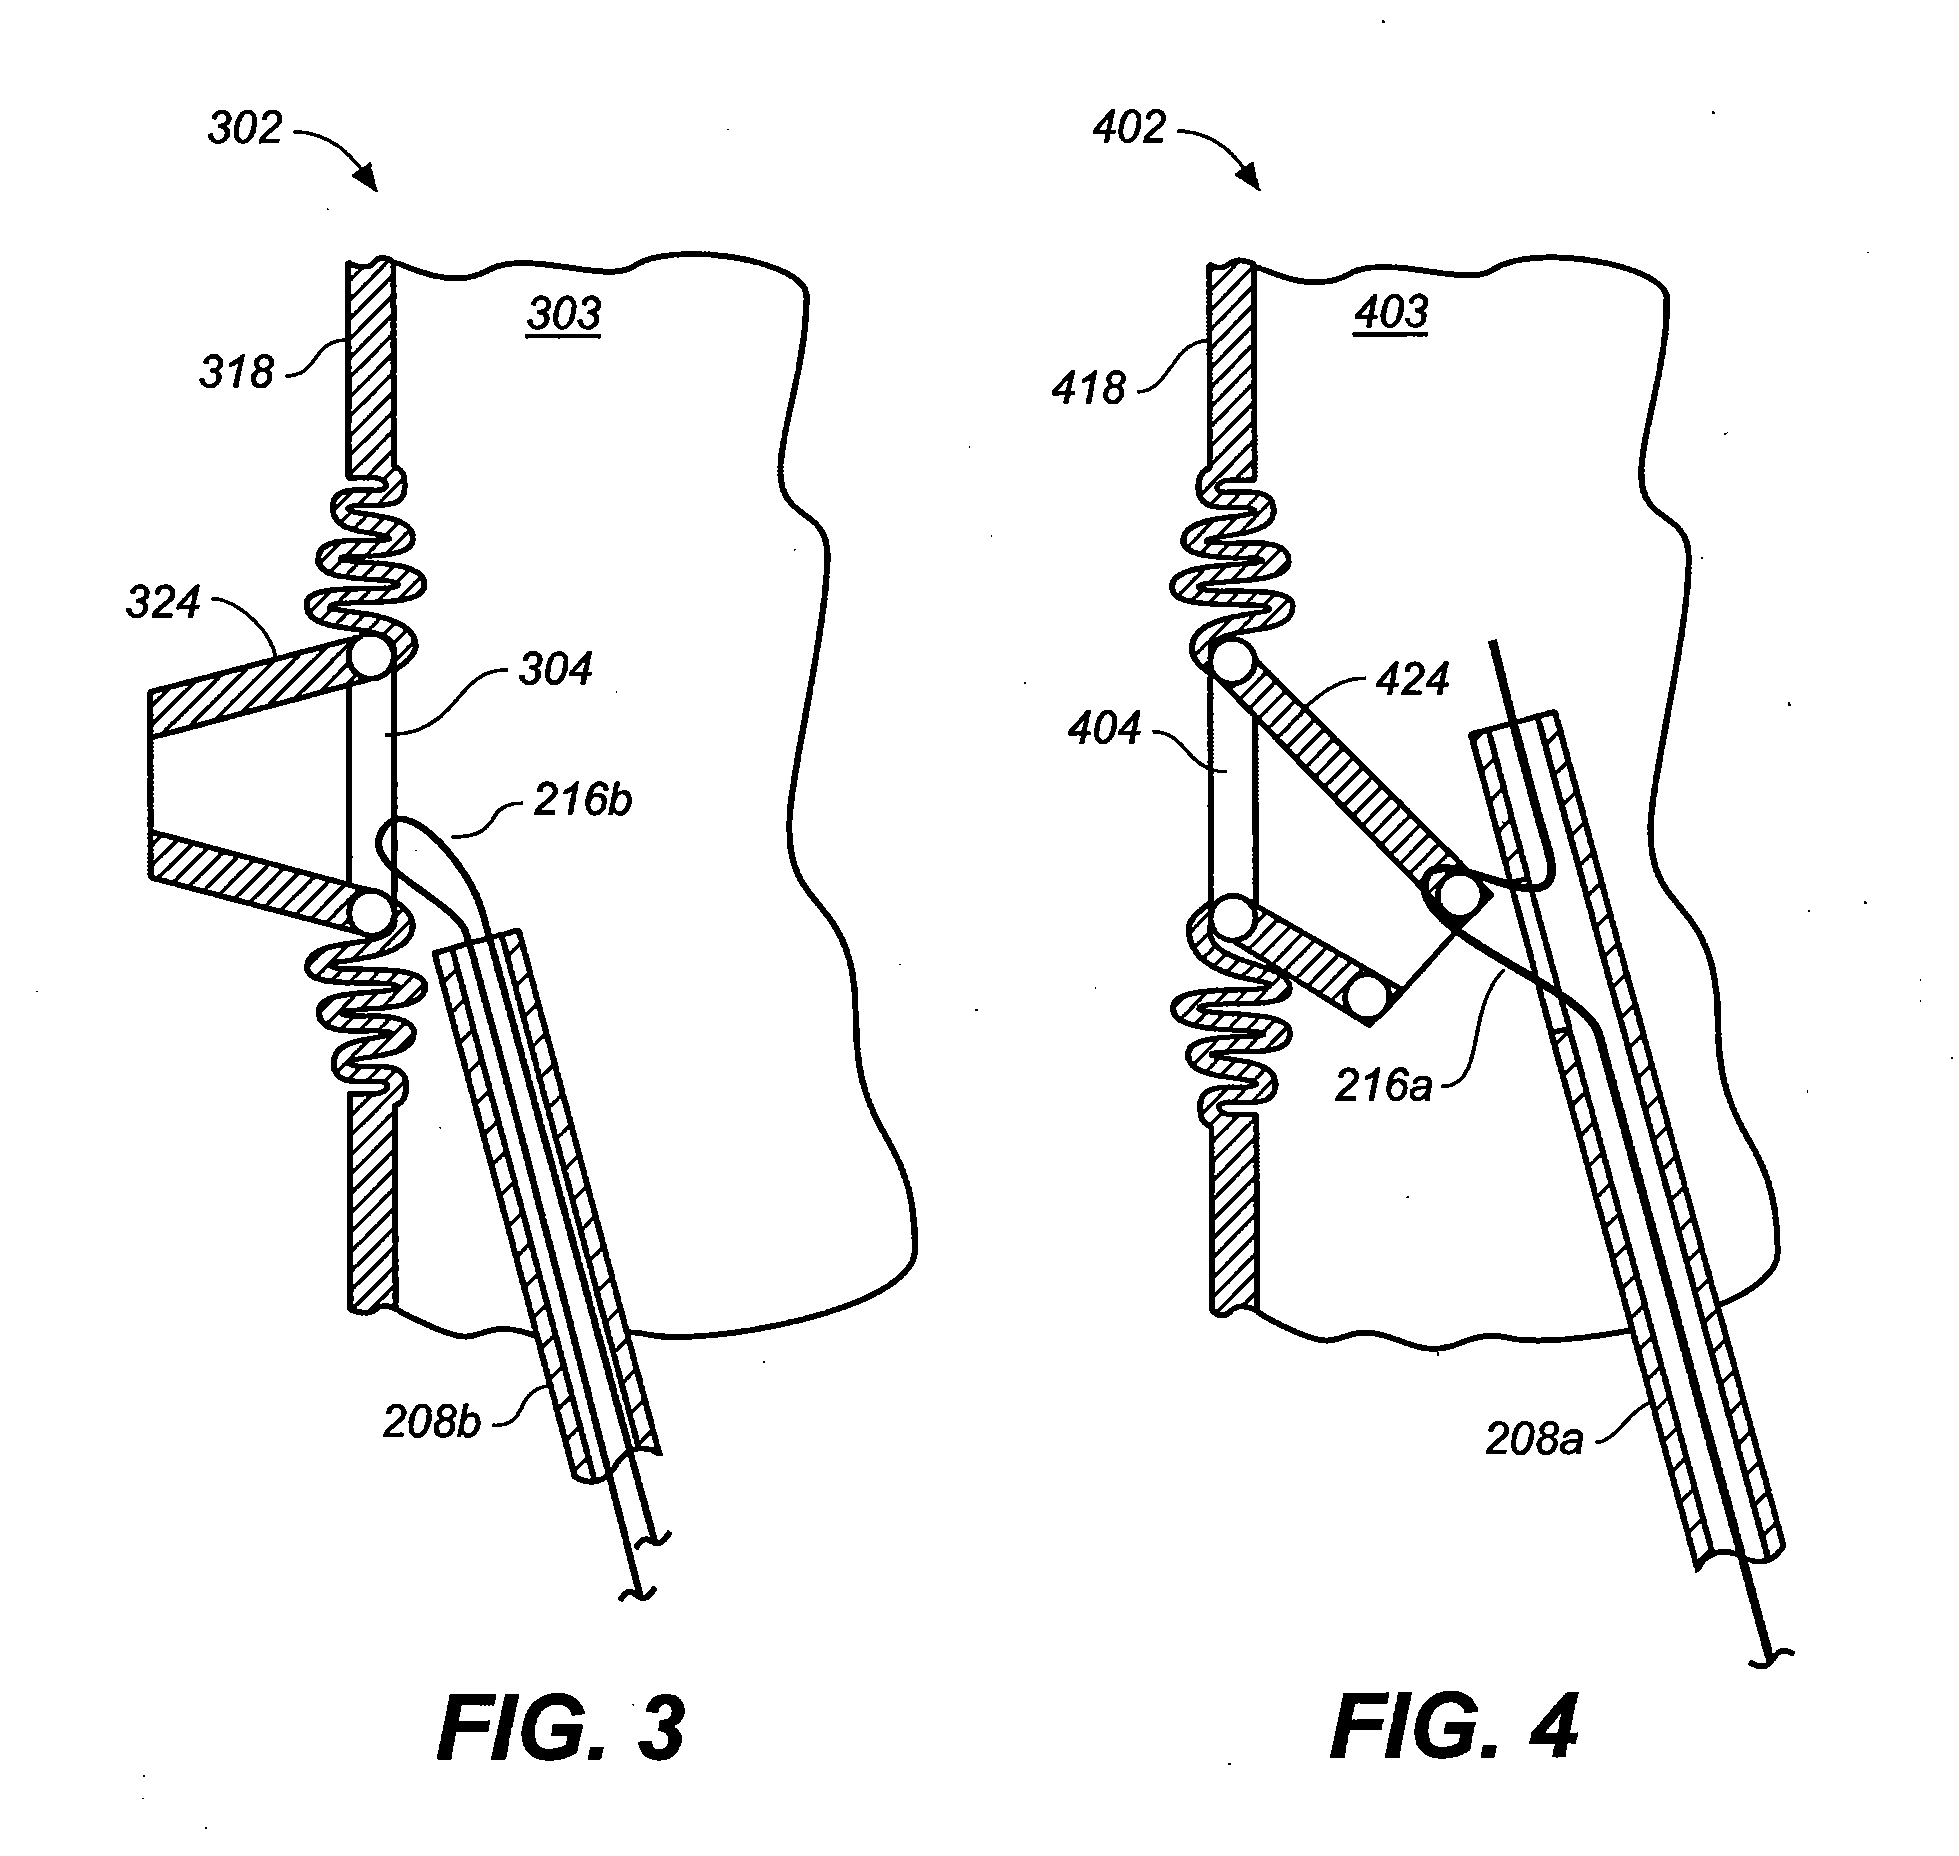 Device and Method for Controlling the Positioning of a Stent Graft Fenestration